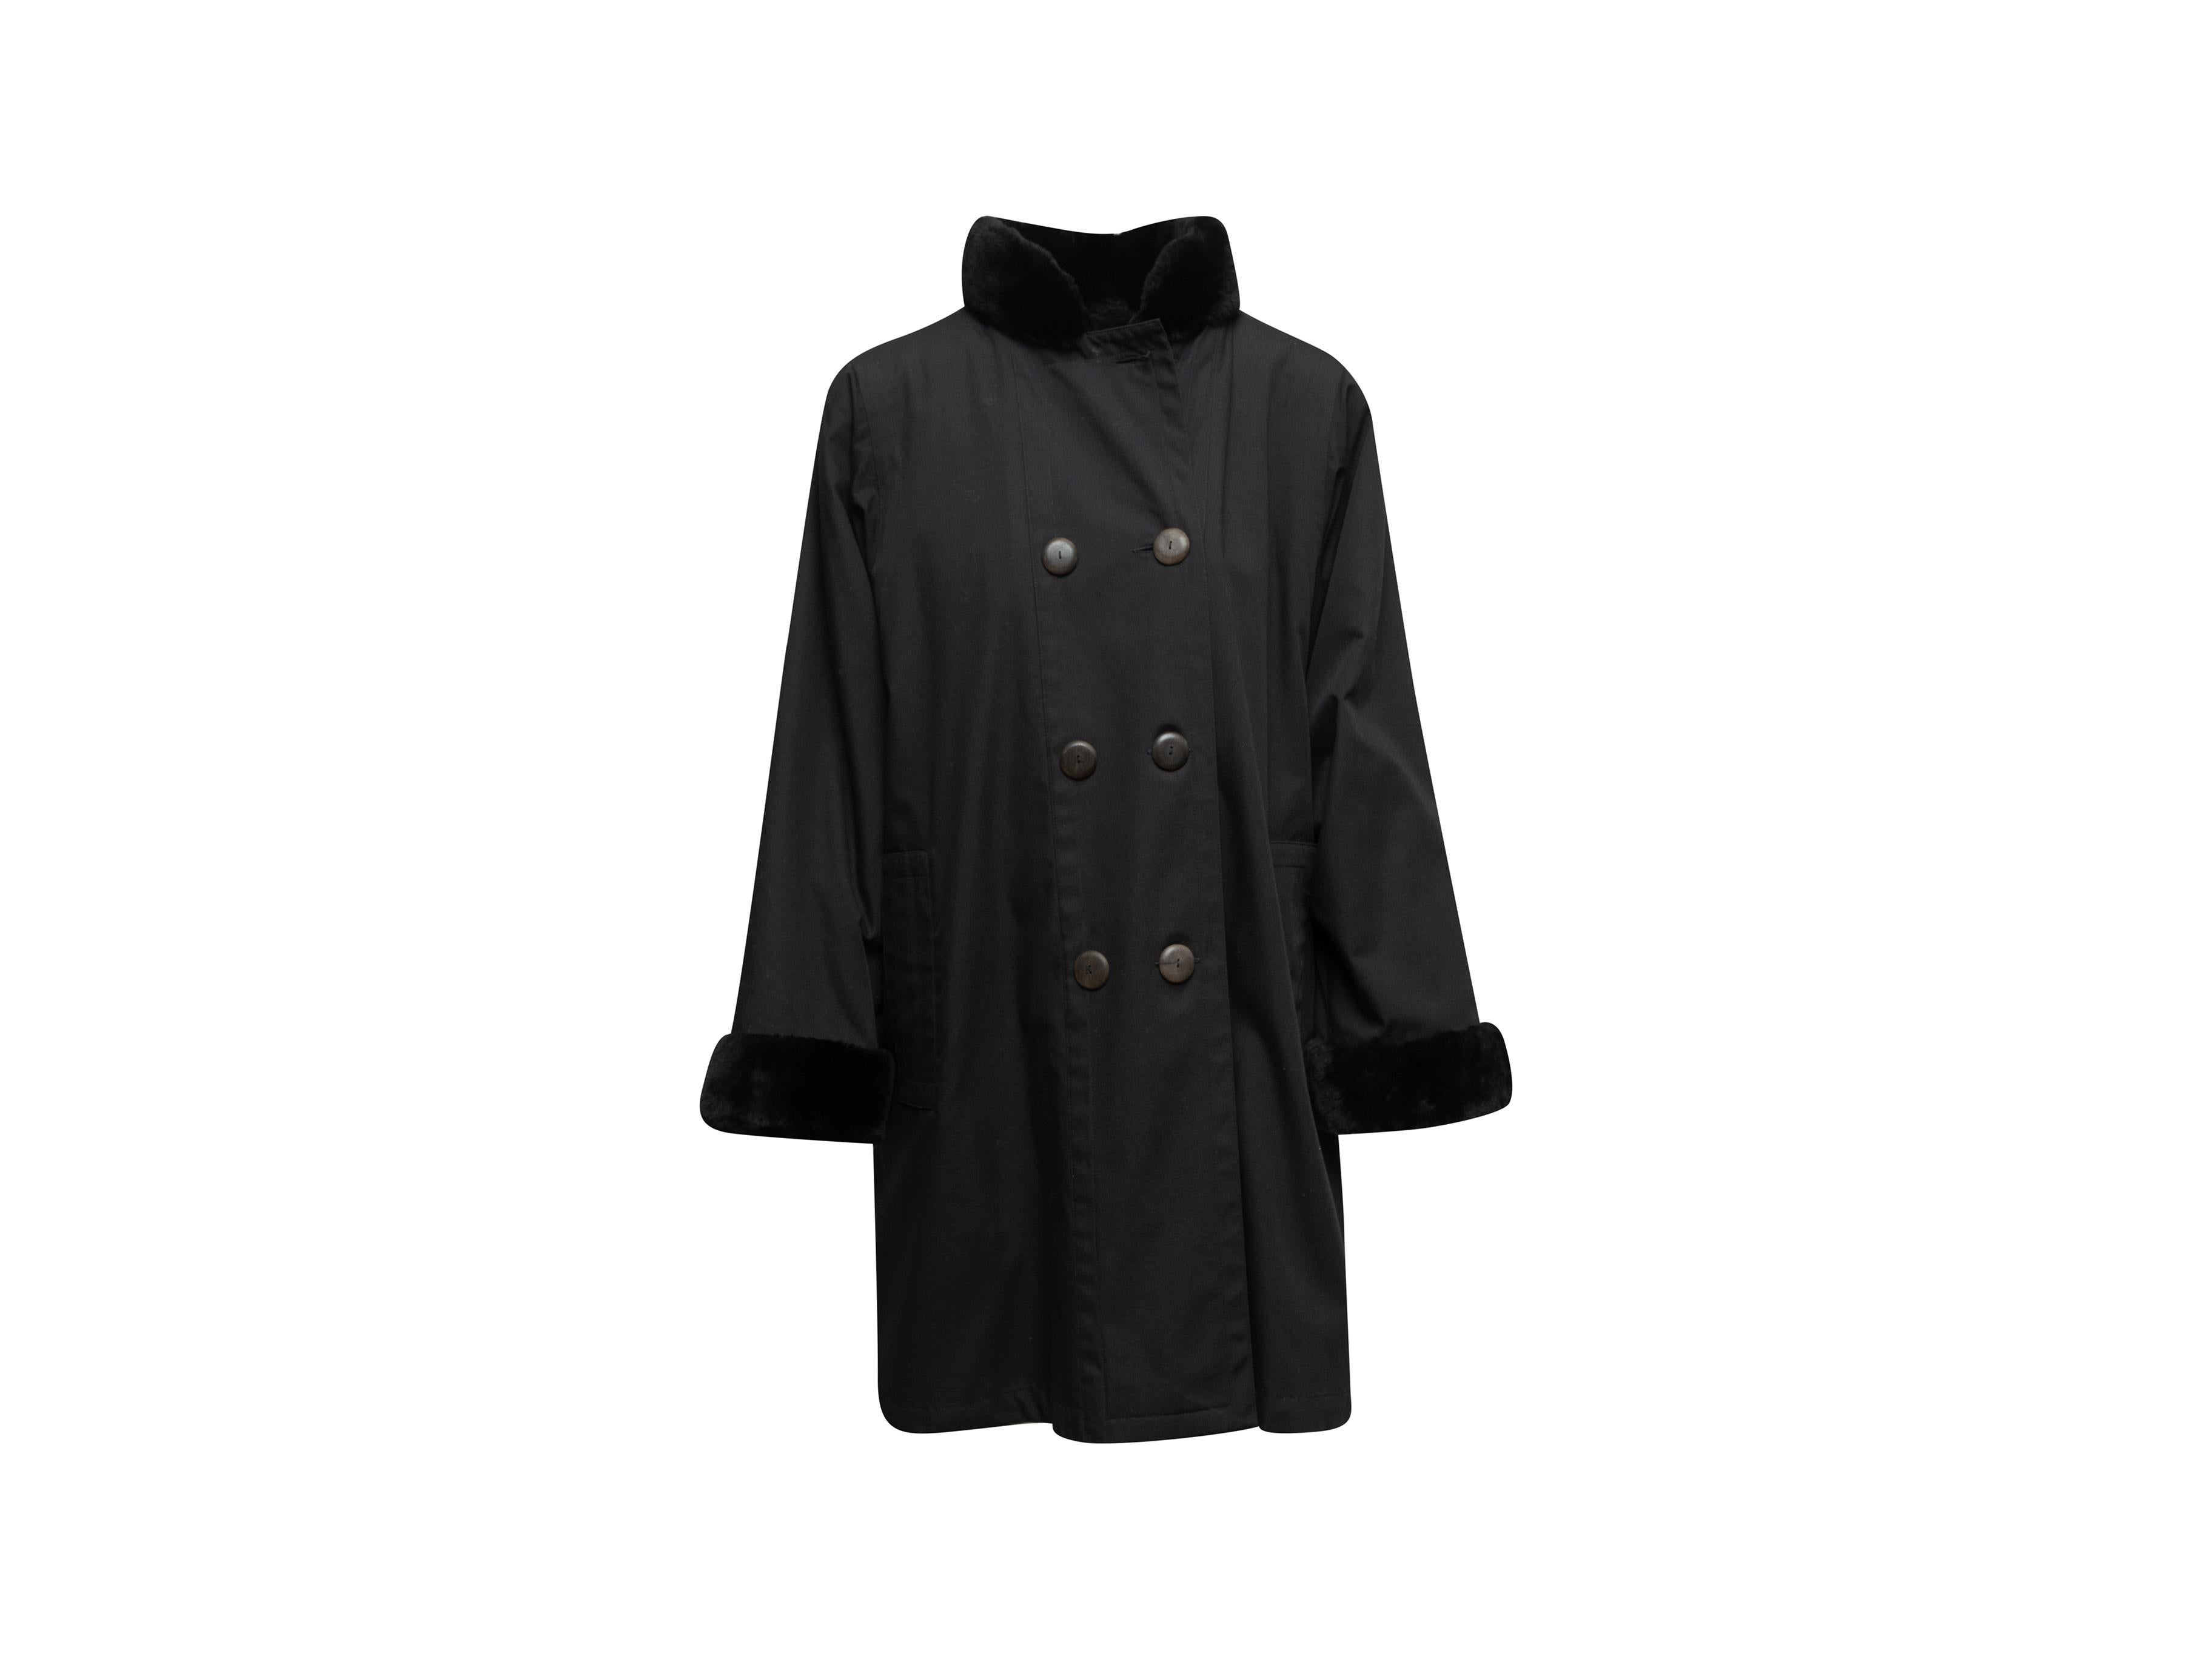 Product details: Vintage black mid-length double-breasted coat by Yves Saint Laurent. Beaver lamb fur trim throughout. Stand collar. Dual hip pockets. Button closures at front. Designer size 40. 34